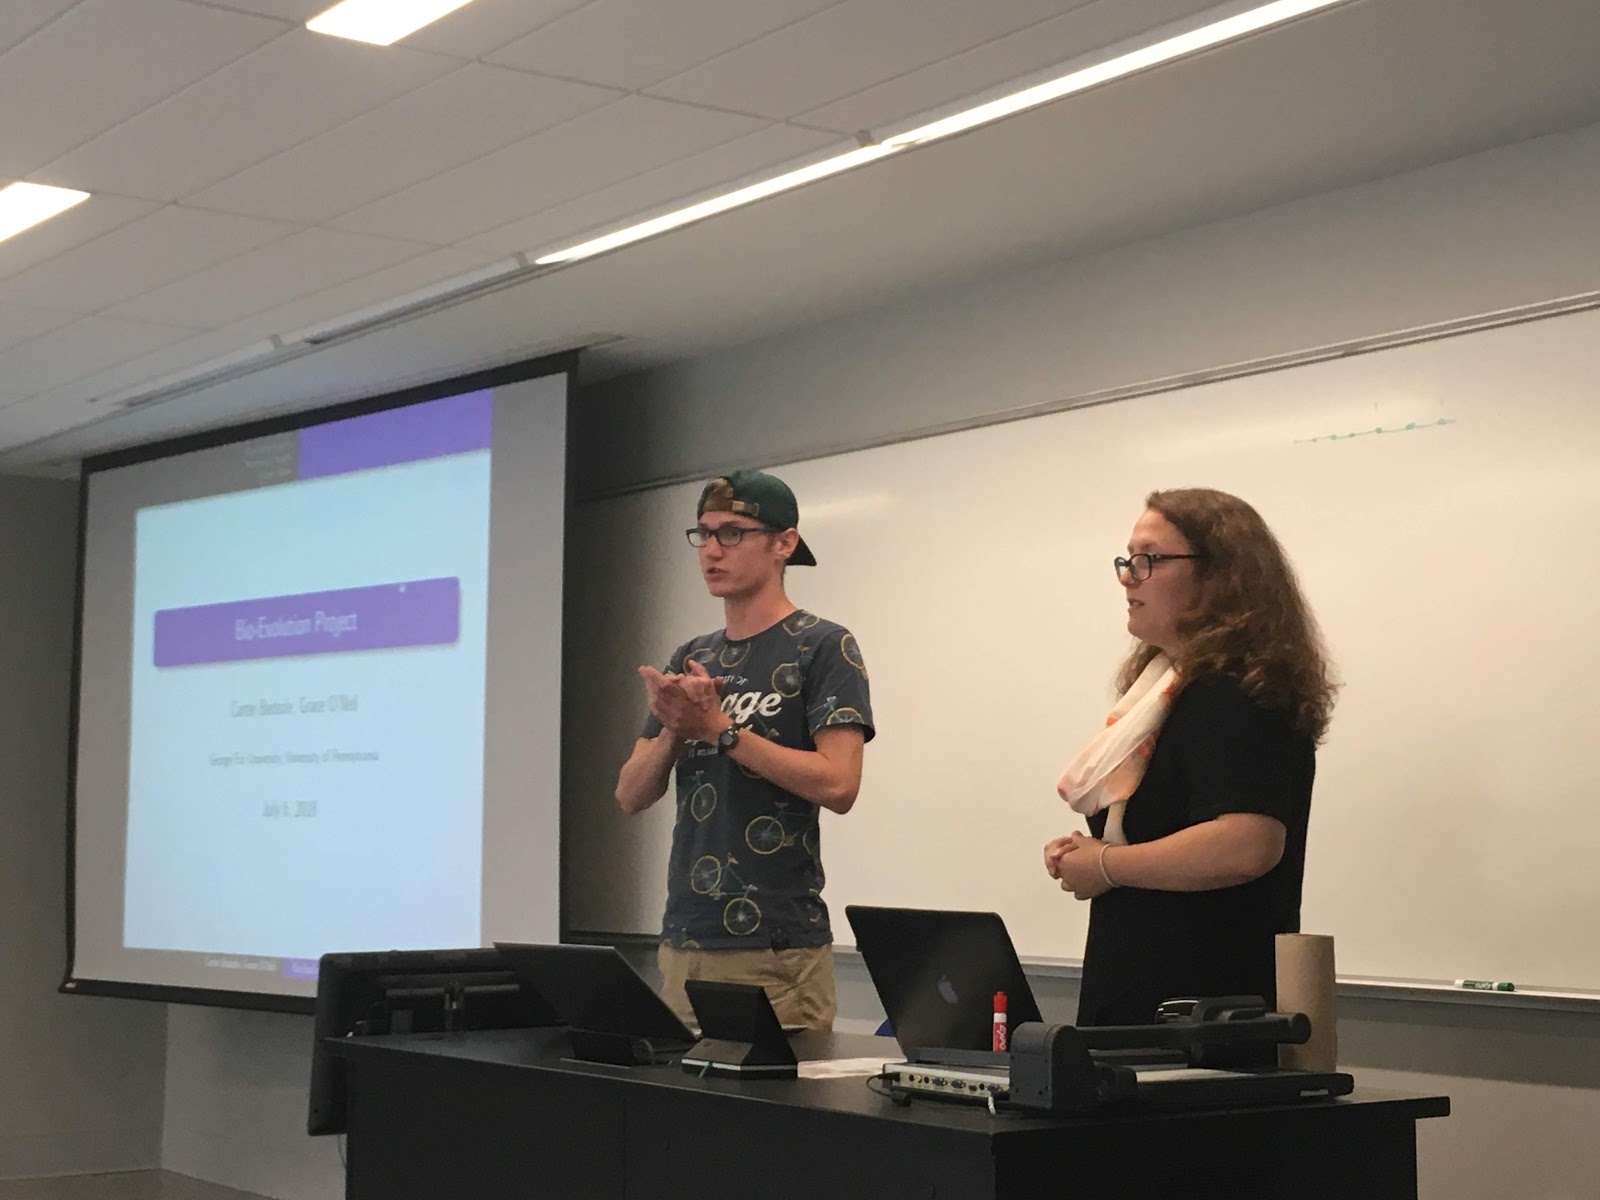 Carter and Grace talking about their work on a model for biological evolution